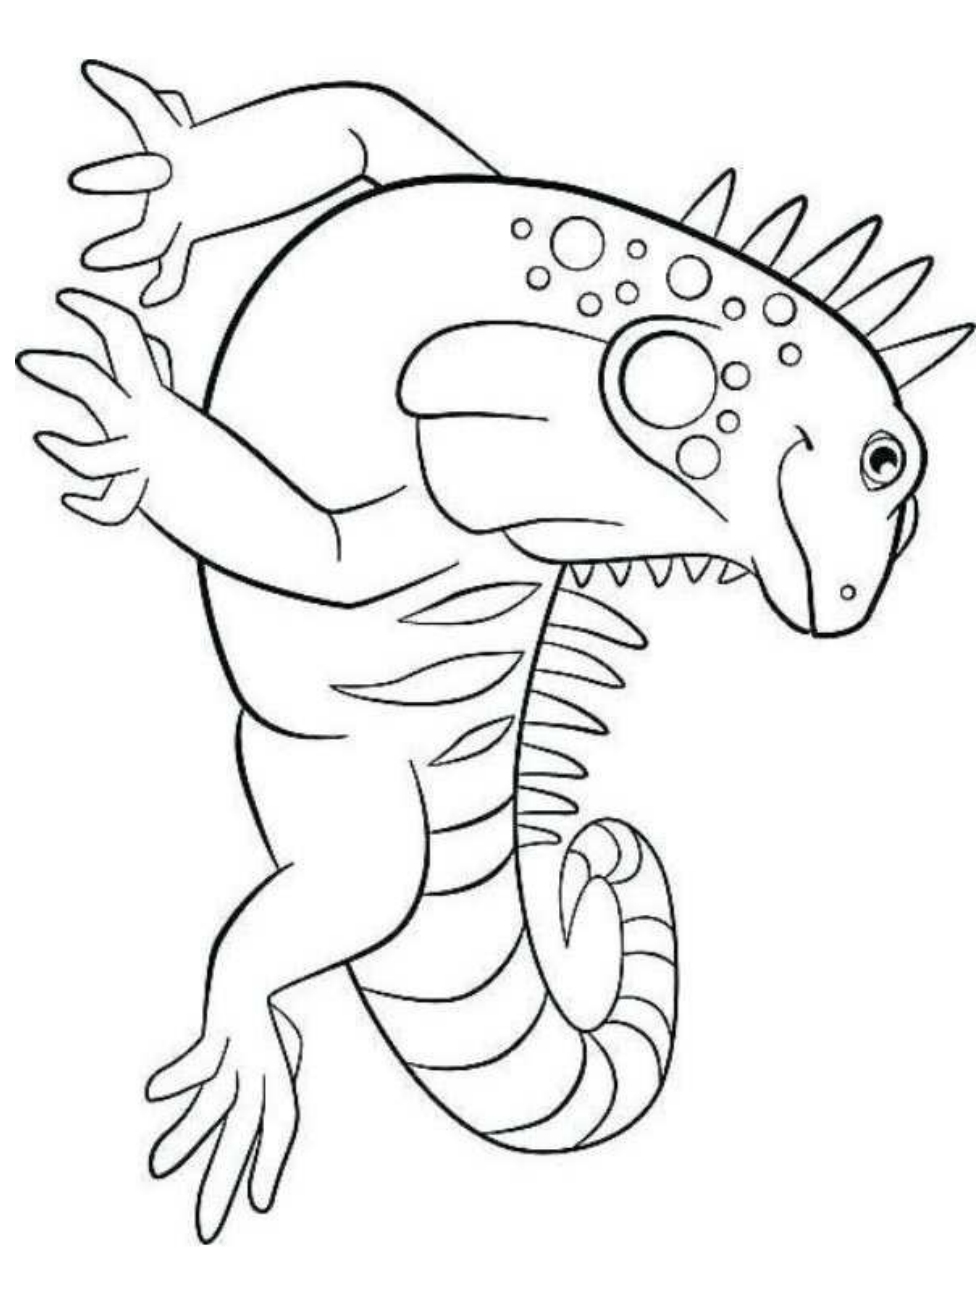 Download Iguana Coloring Page | Coloringnori - Coloring Pages for Kids